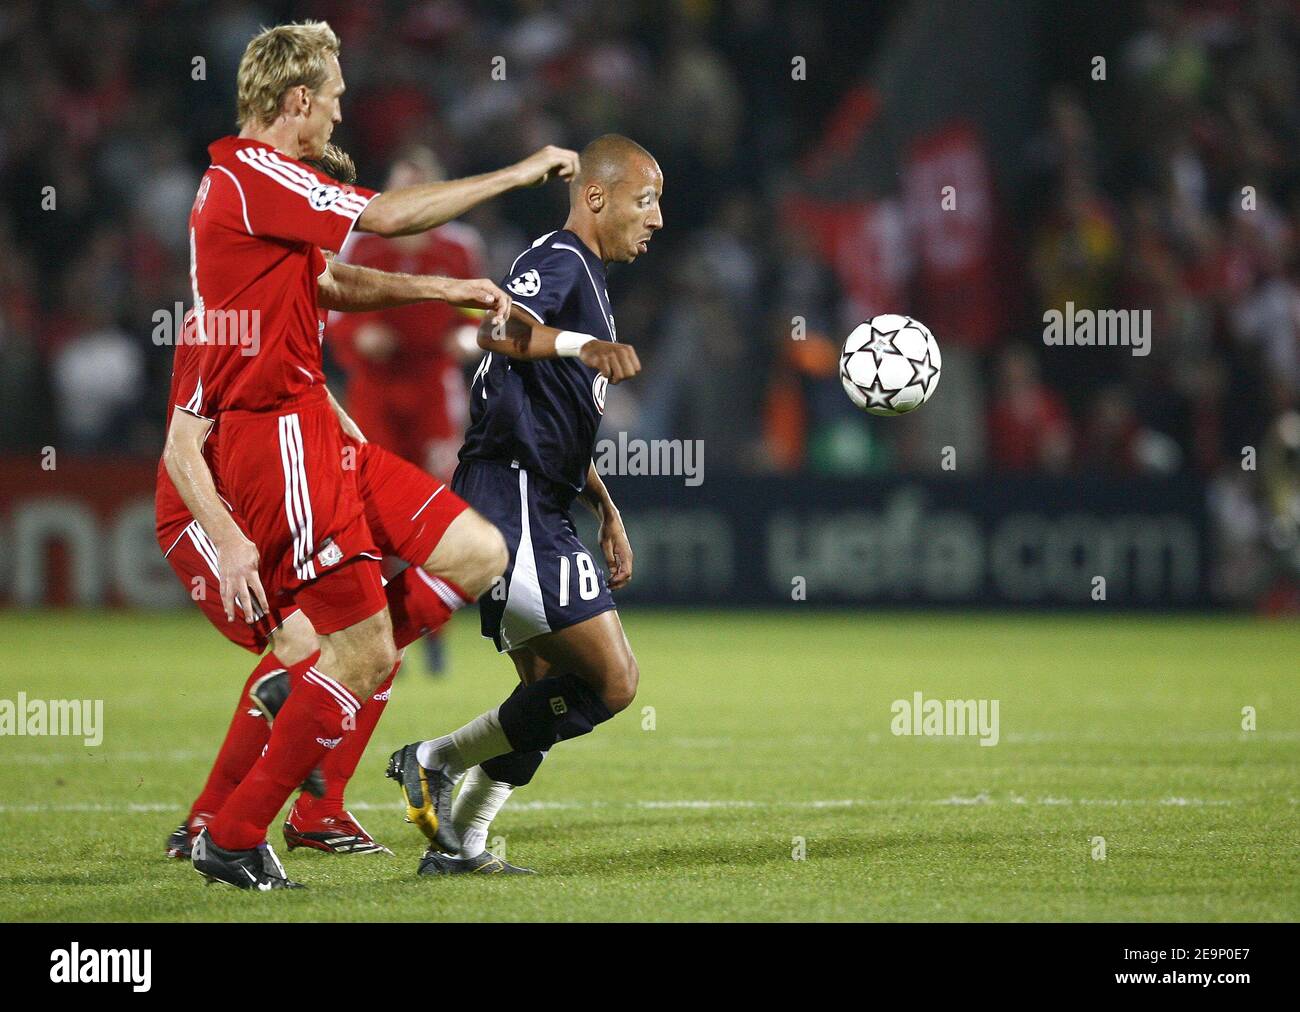 Bordeaux' Julien Faubert in action during the UEFA Champions League, Group C, Girondins de Bordeaux vs Liverpool FC at the Stade Chaban-Delmas in Bordeaux, France on October 18, 2006. Liverpool won 1-0. Photo by Christian Liewig/ABACAPRESS.COM Stock Photo